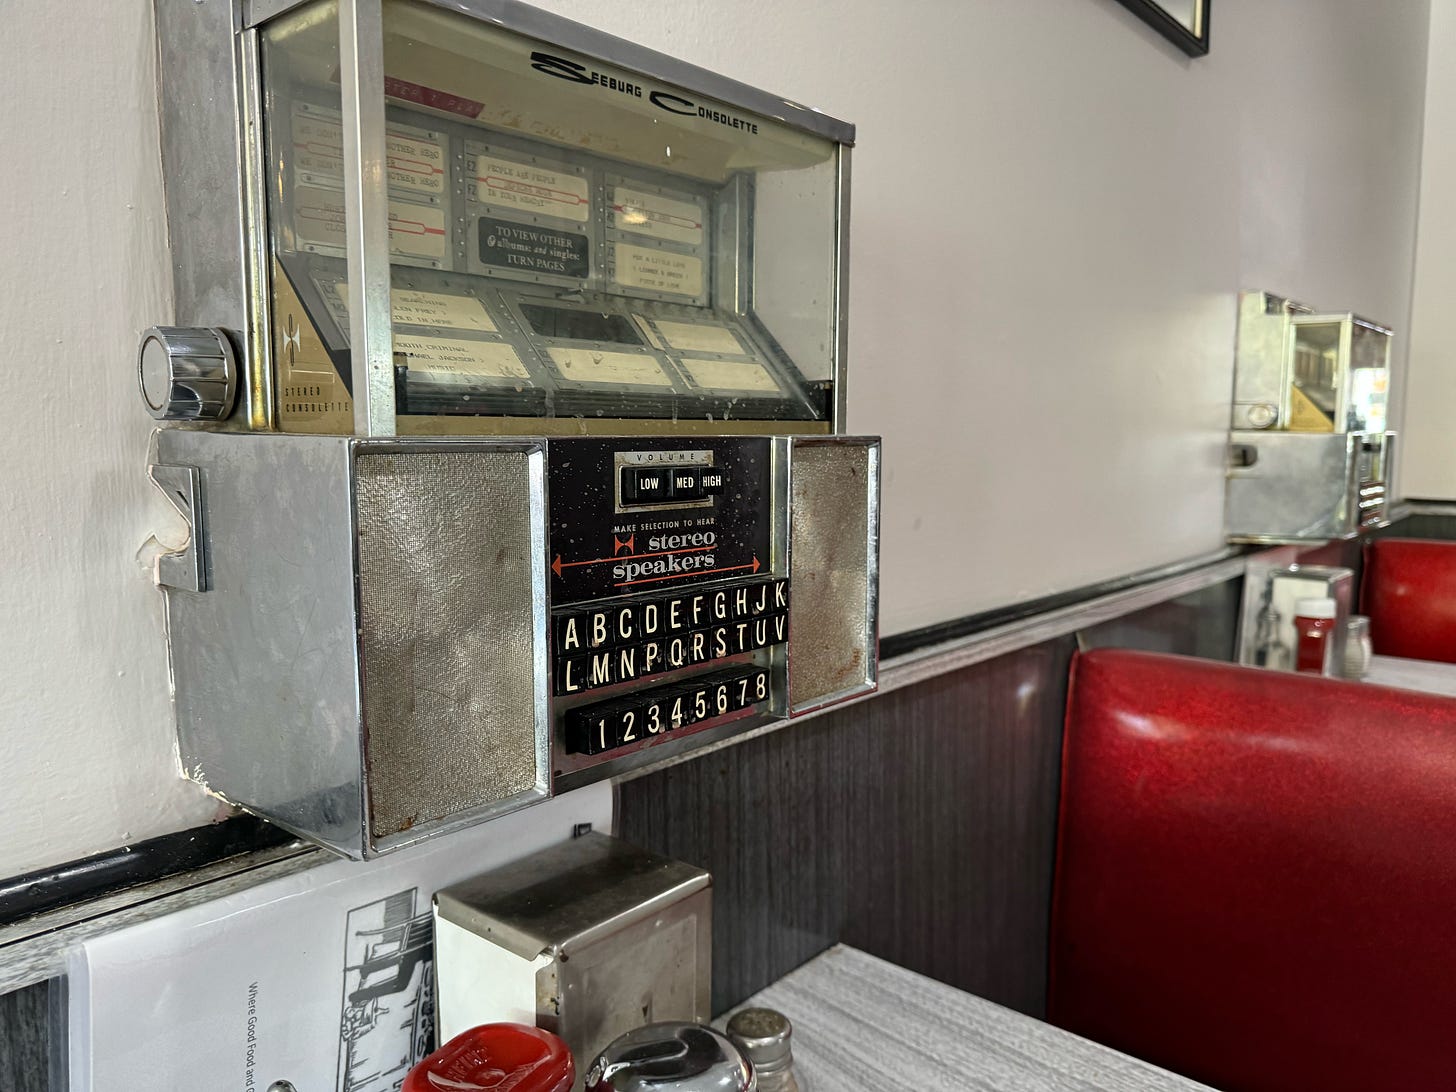 A Seeburg Consolette juke box mounted to the wall beside a booth